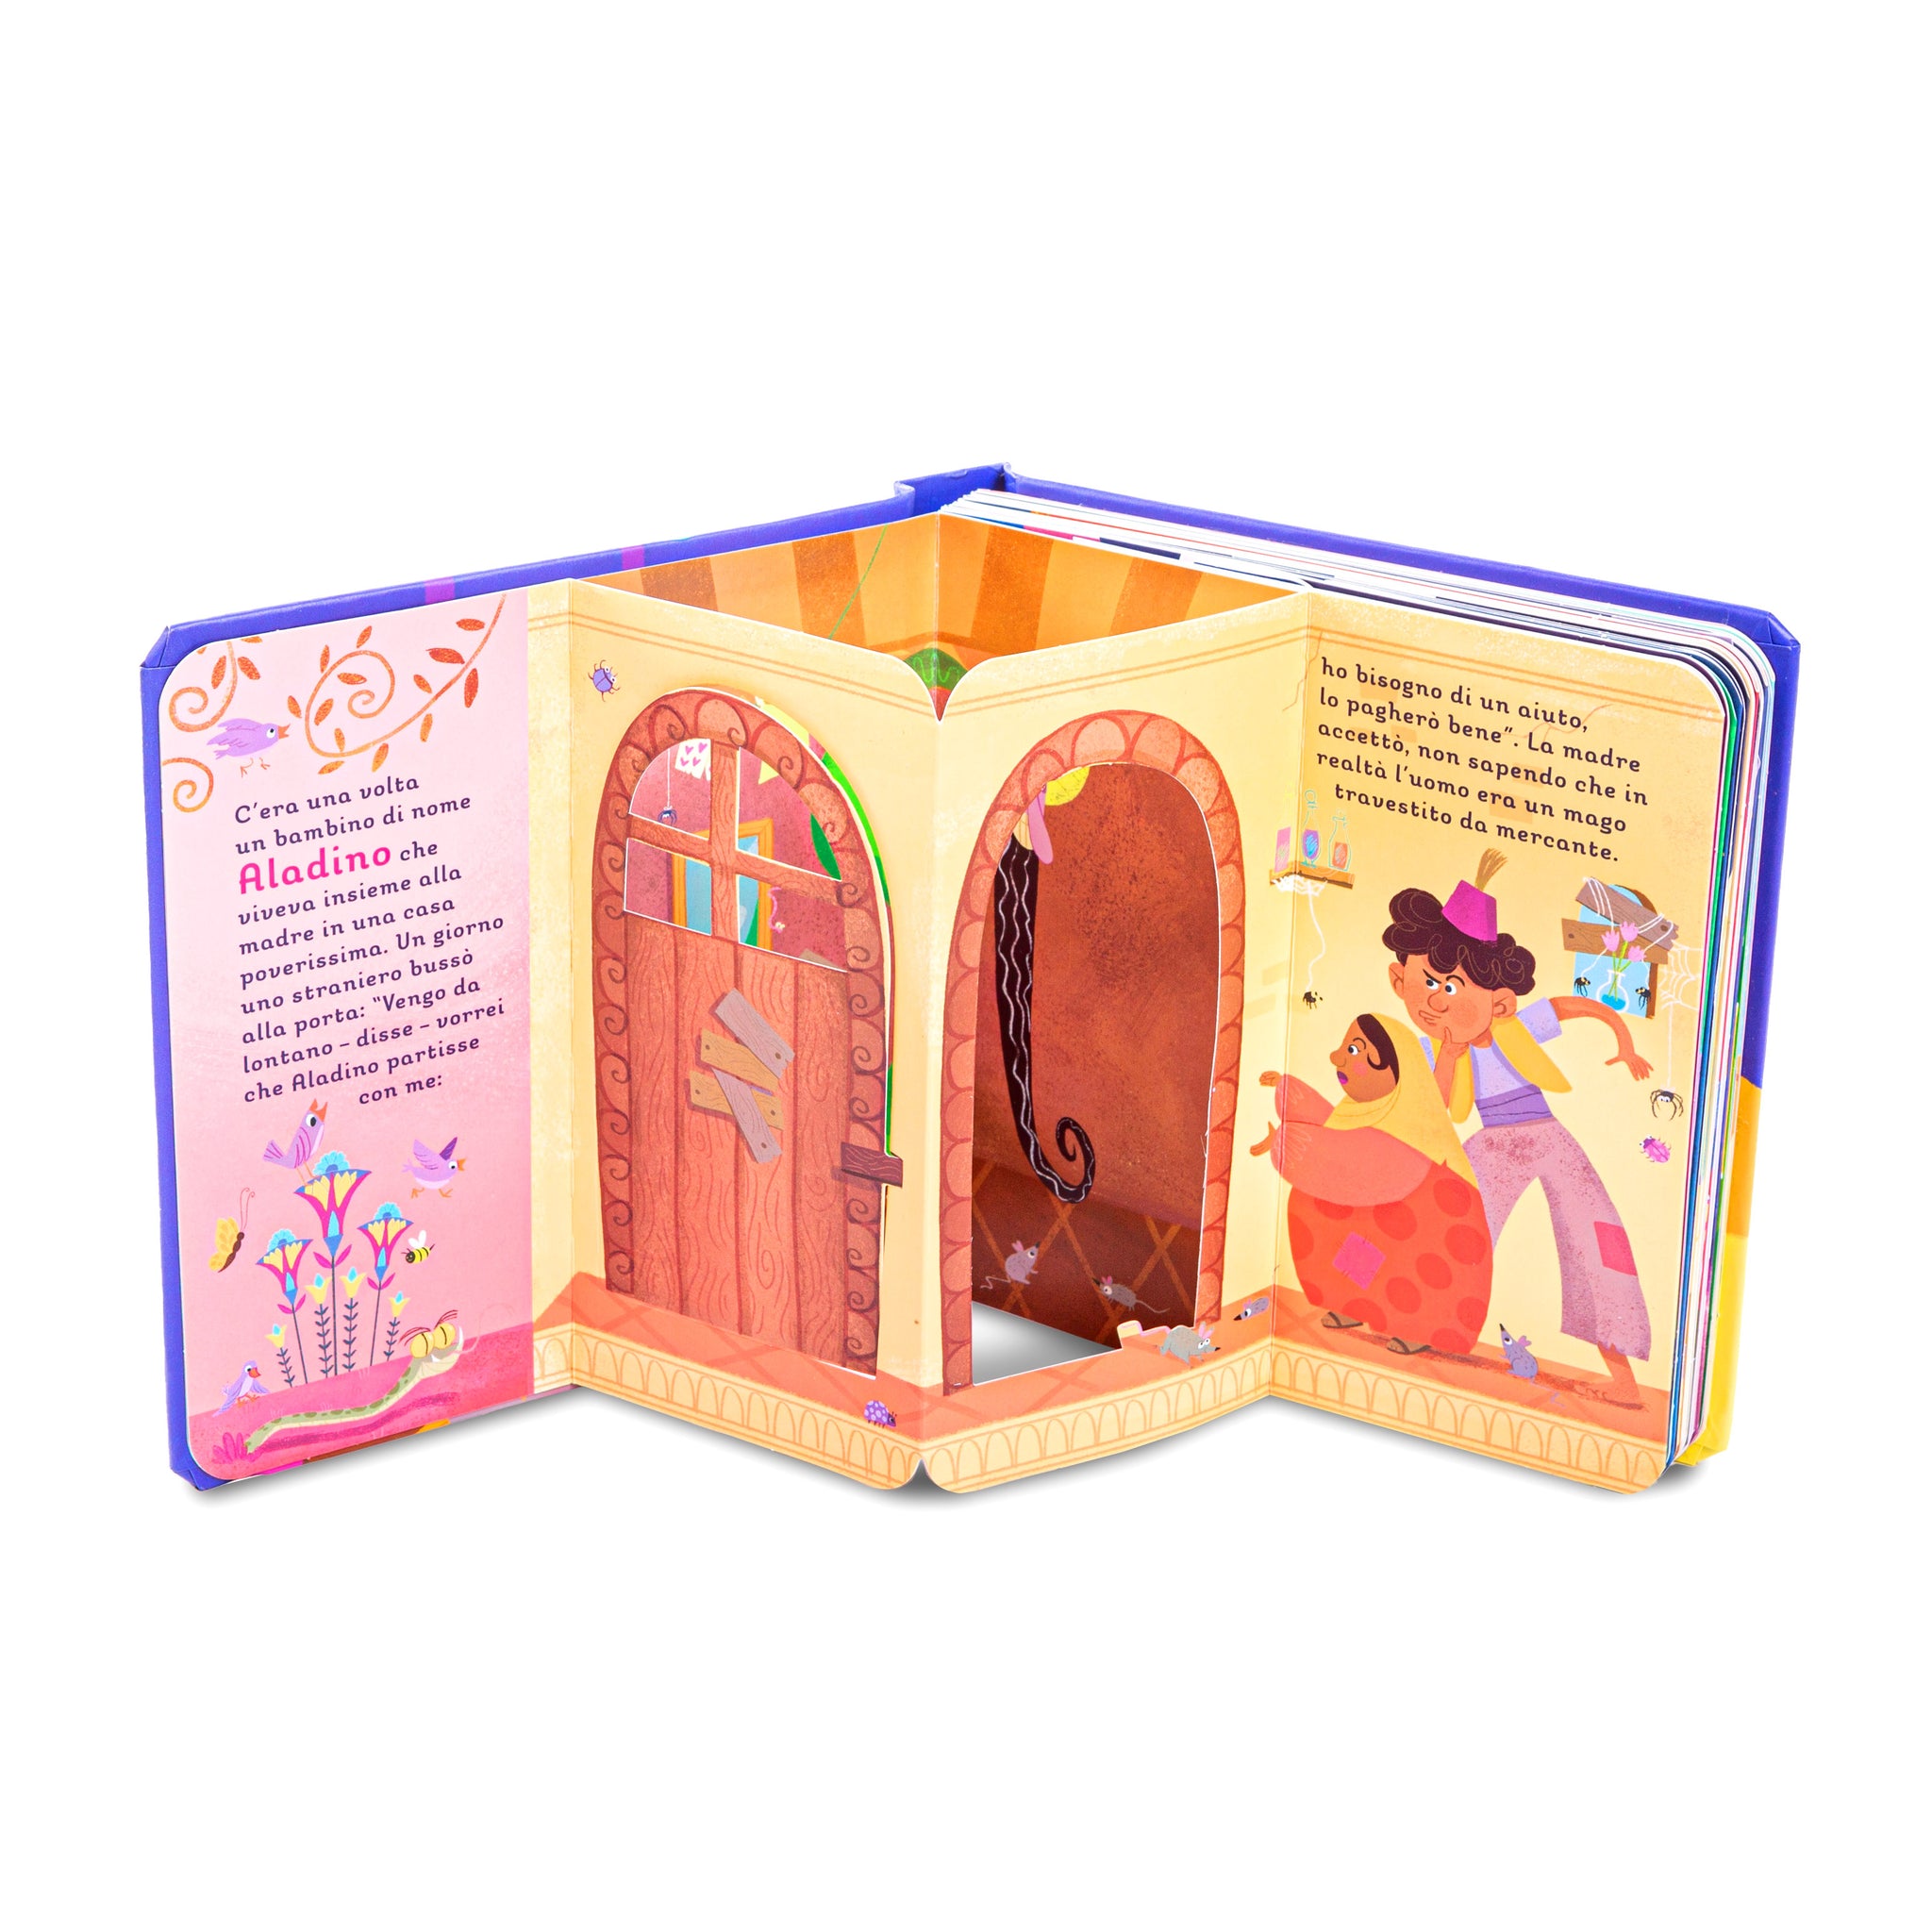 Pop up fairy tales - Aladdin and the wonderful lamp